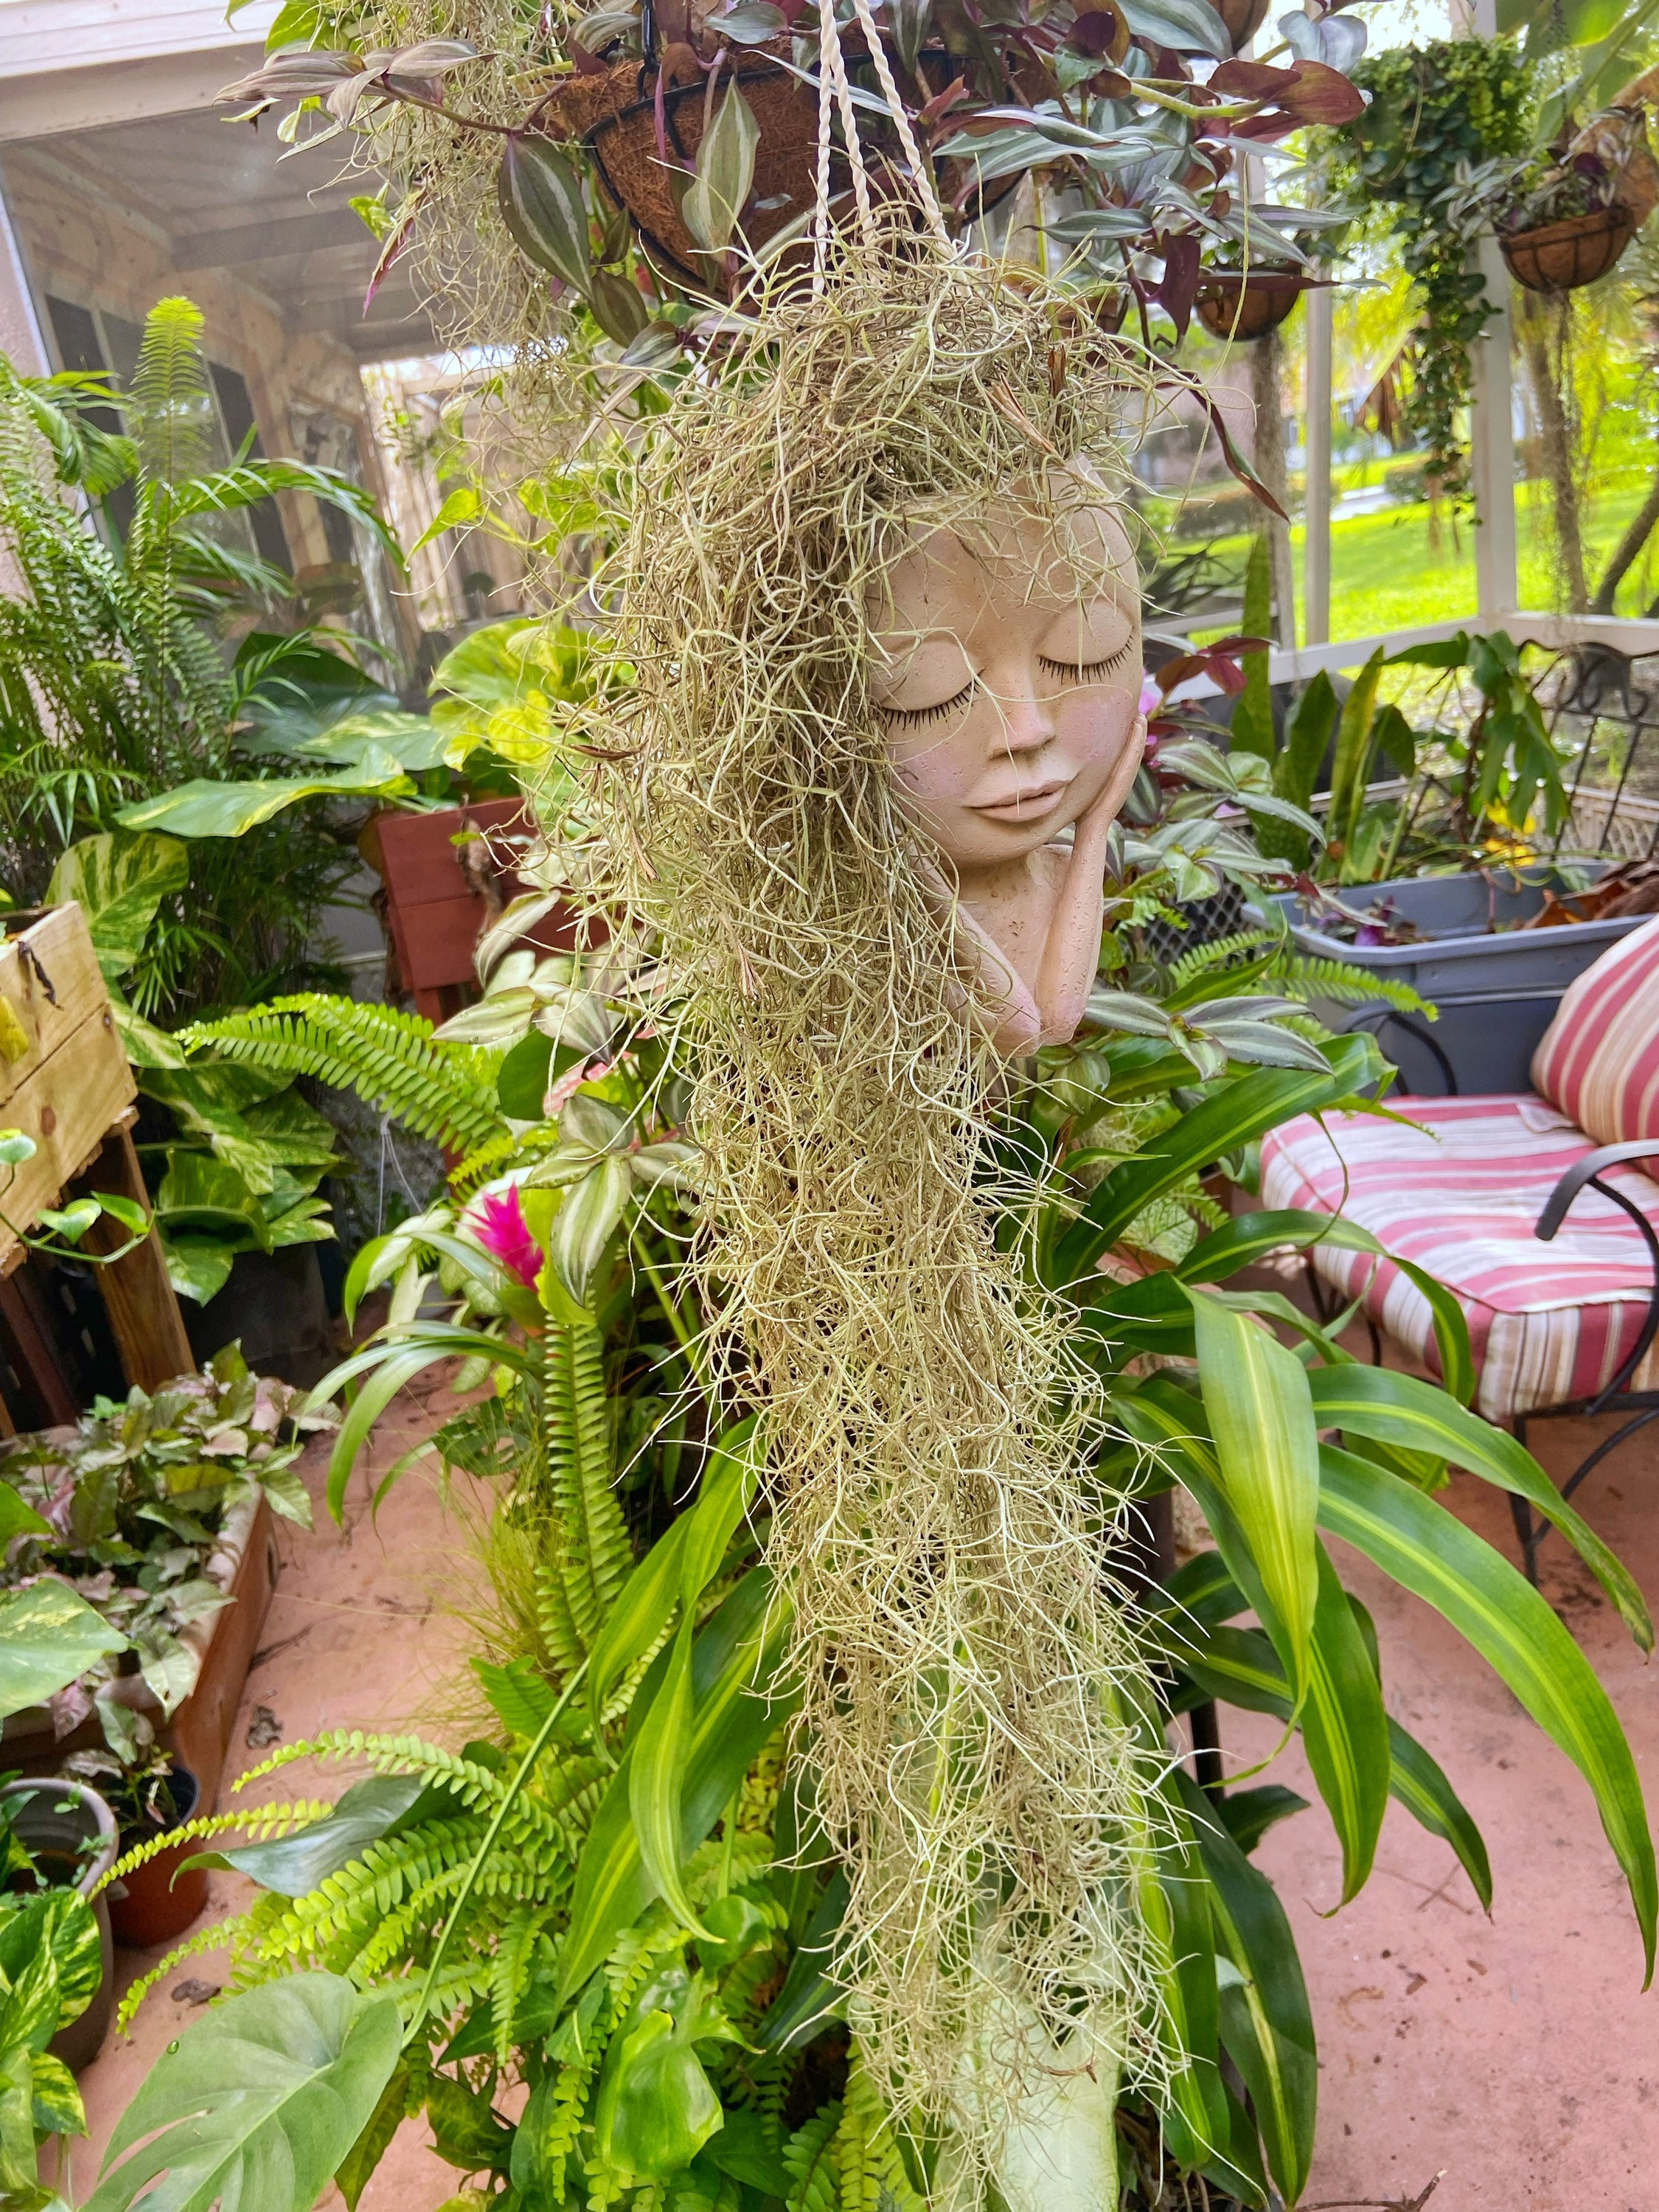  Spanish Moss for Potted Plants, 1 Gallon Bag Tillandsia Spanish  Moss Live Air Plant Live Indoors Outdoors, Spanish Moss for Crafts for  Planting : Patio, Lawn & Garden